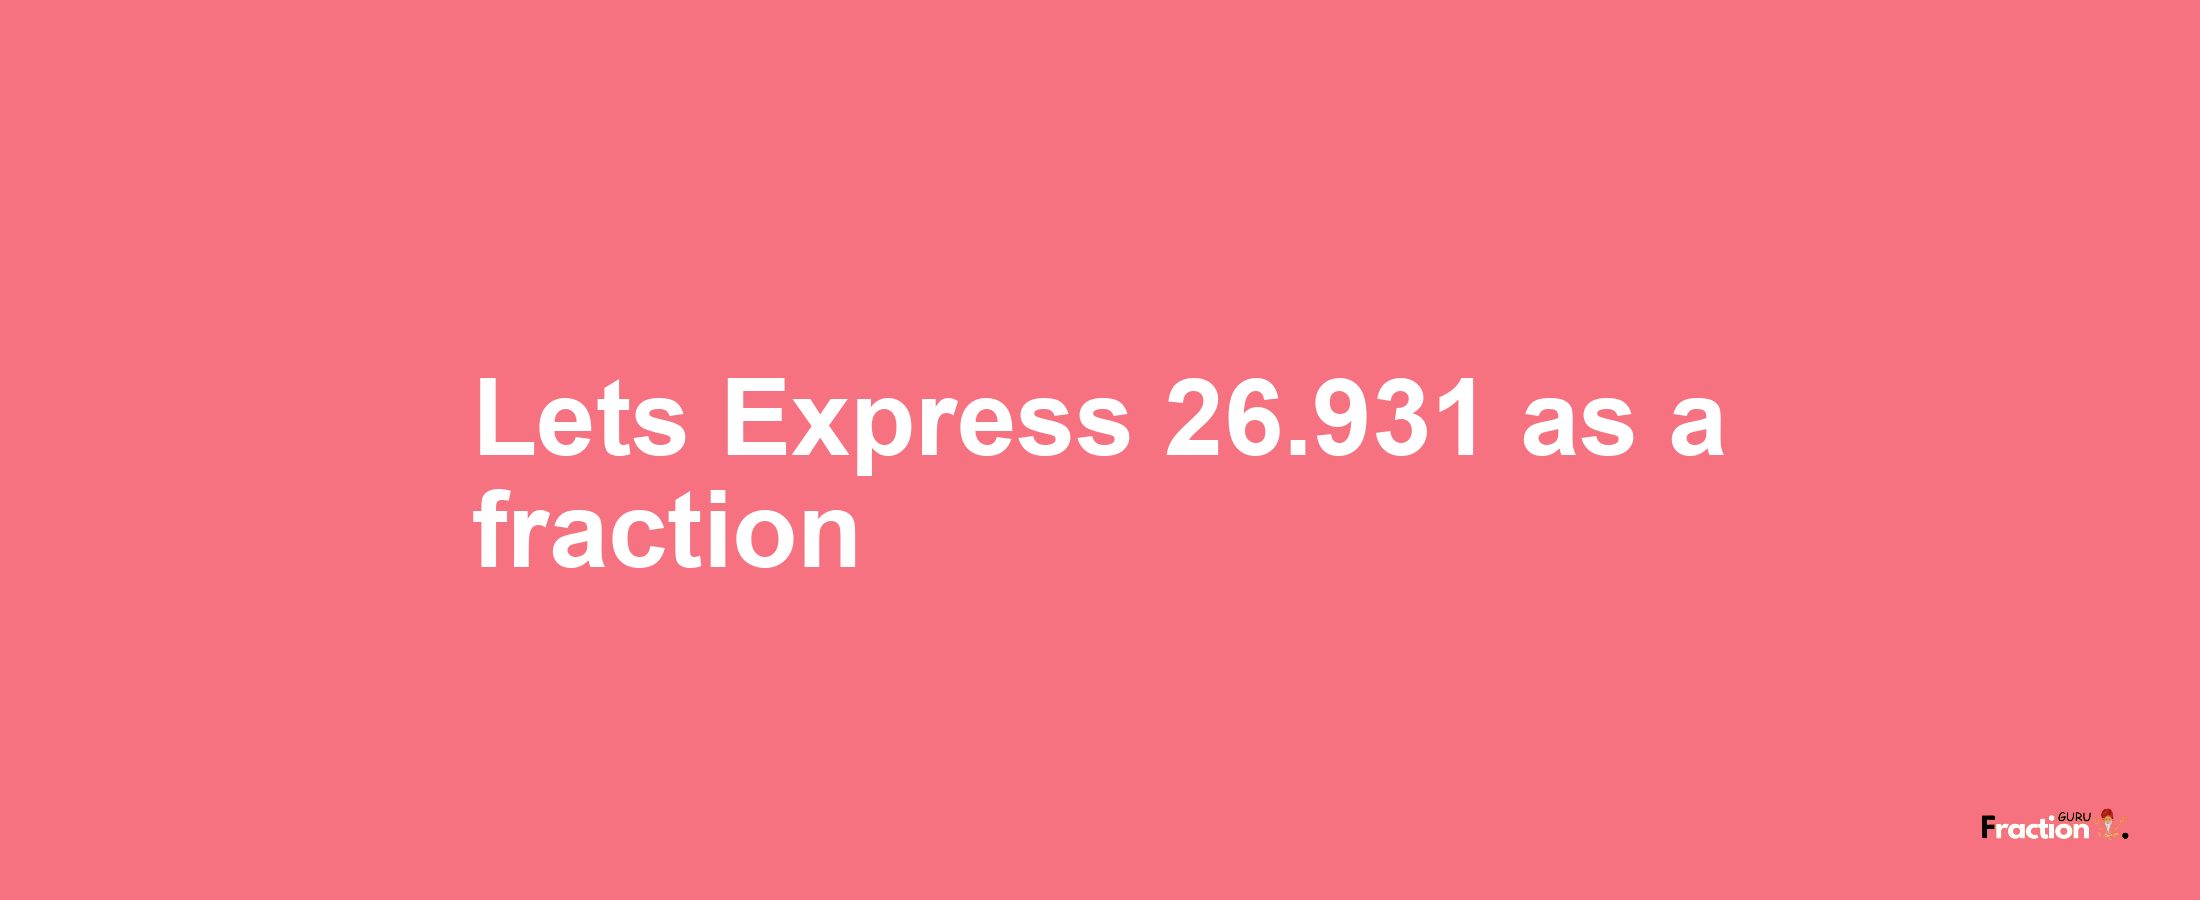 Lets Express 26.931 as afraction